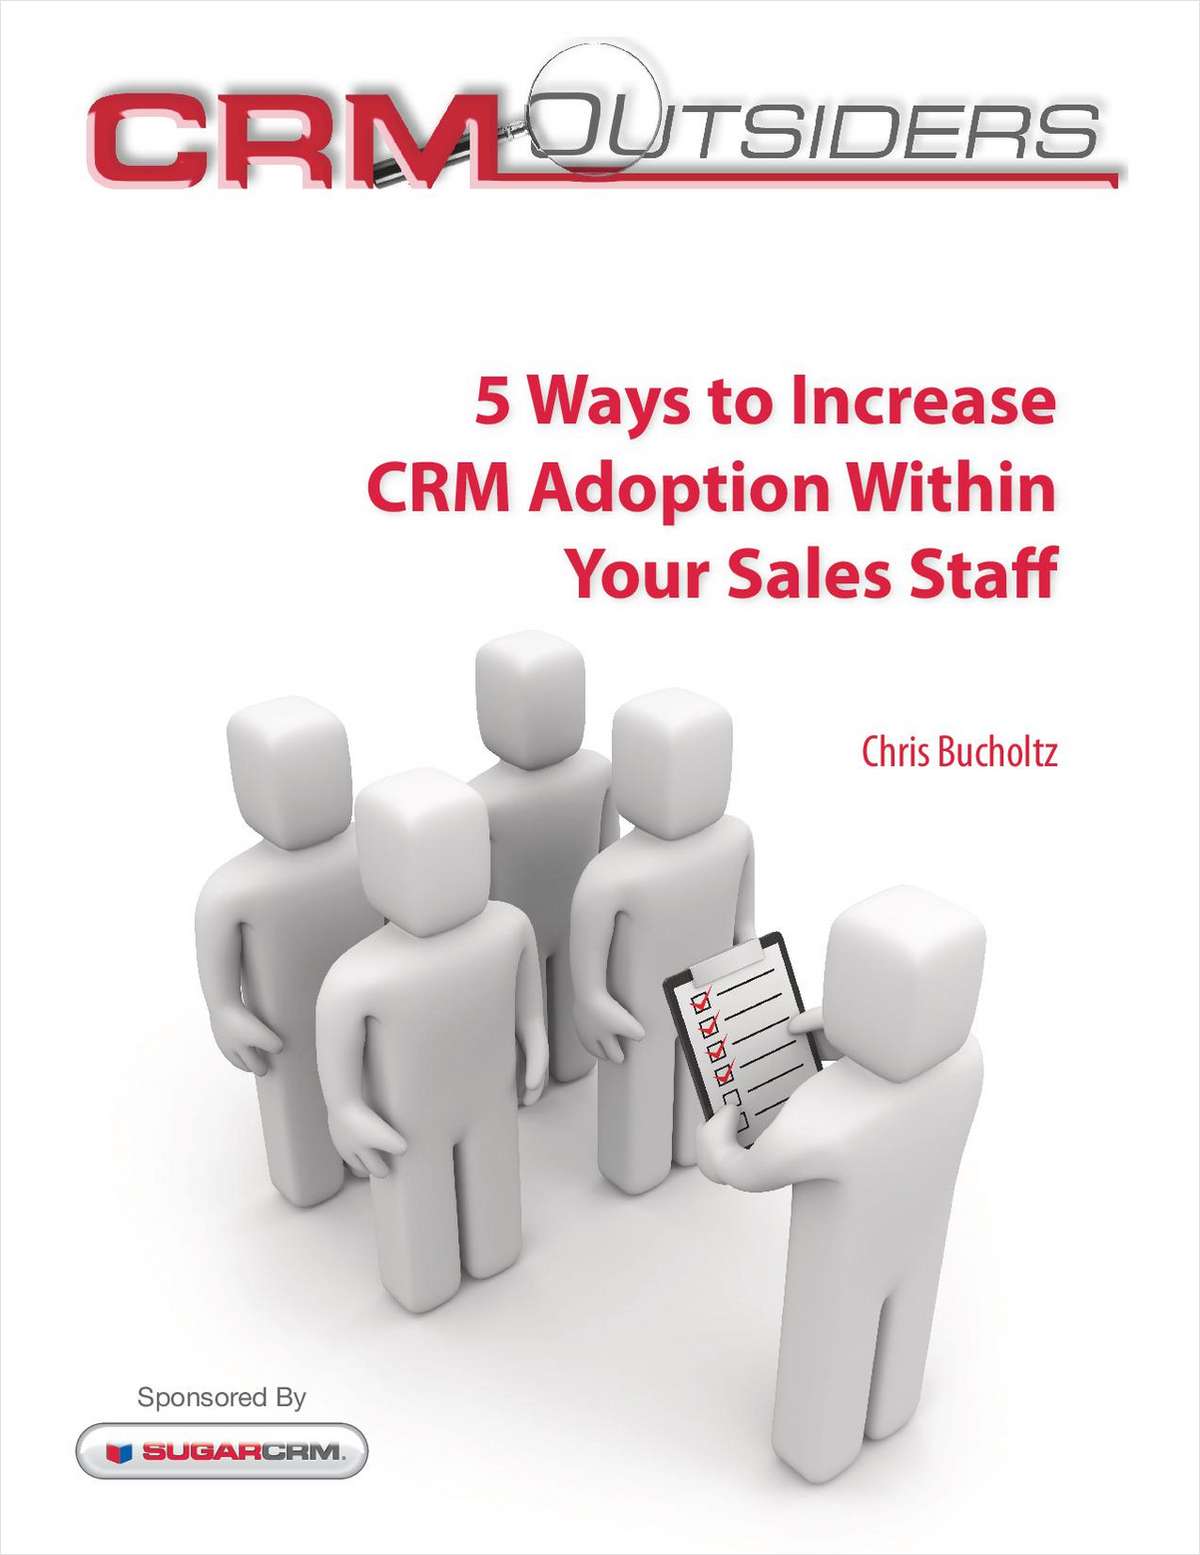 5 Ways to Increase CRM Adoption Within Your Sales Staff